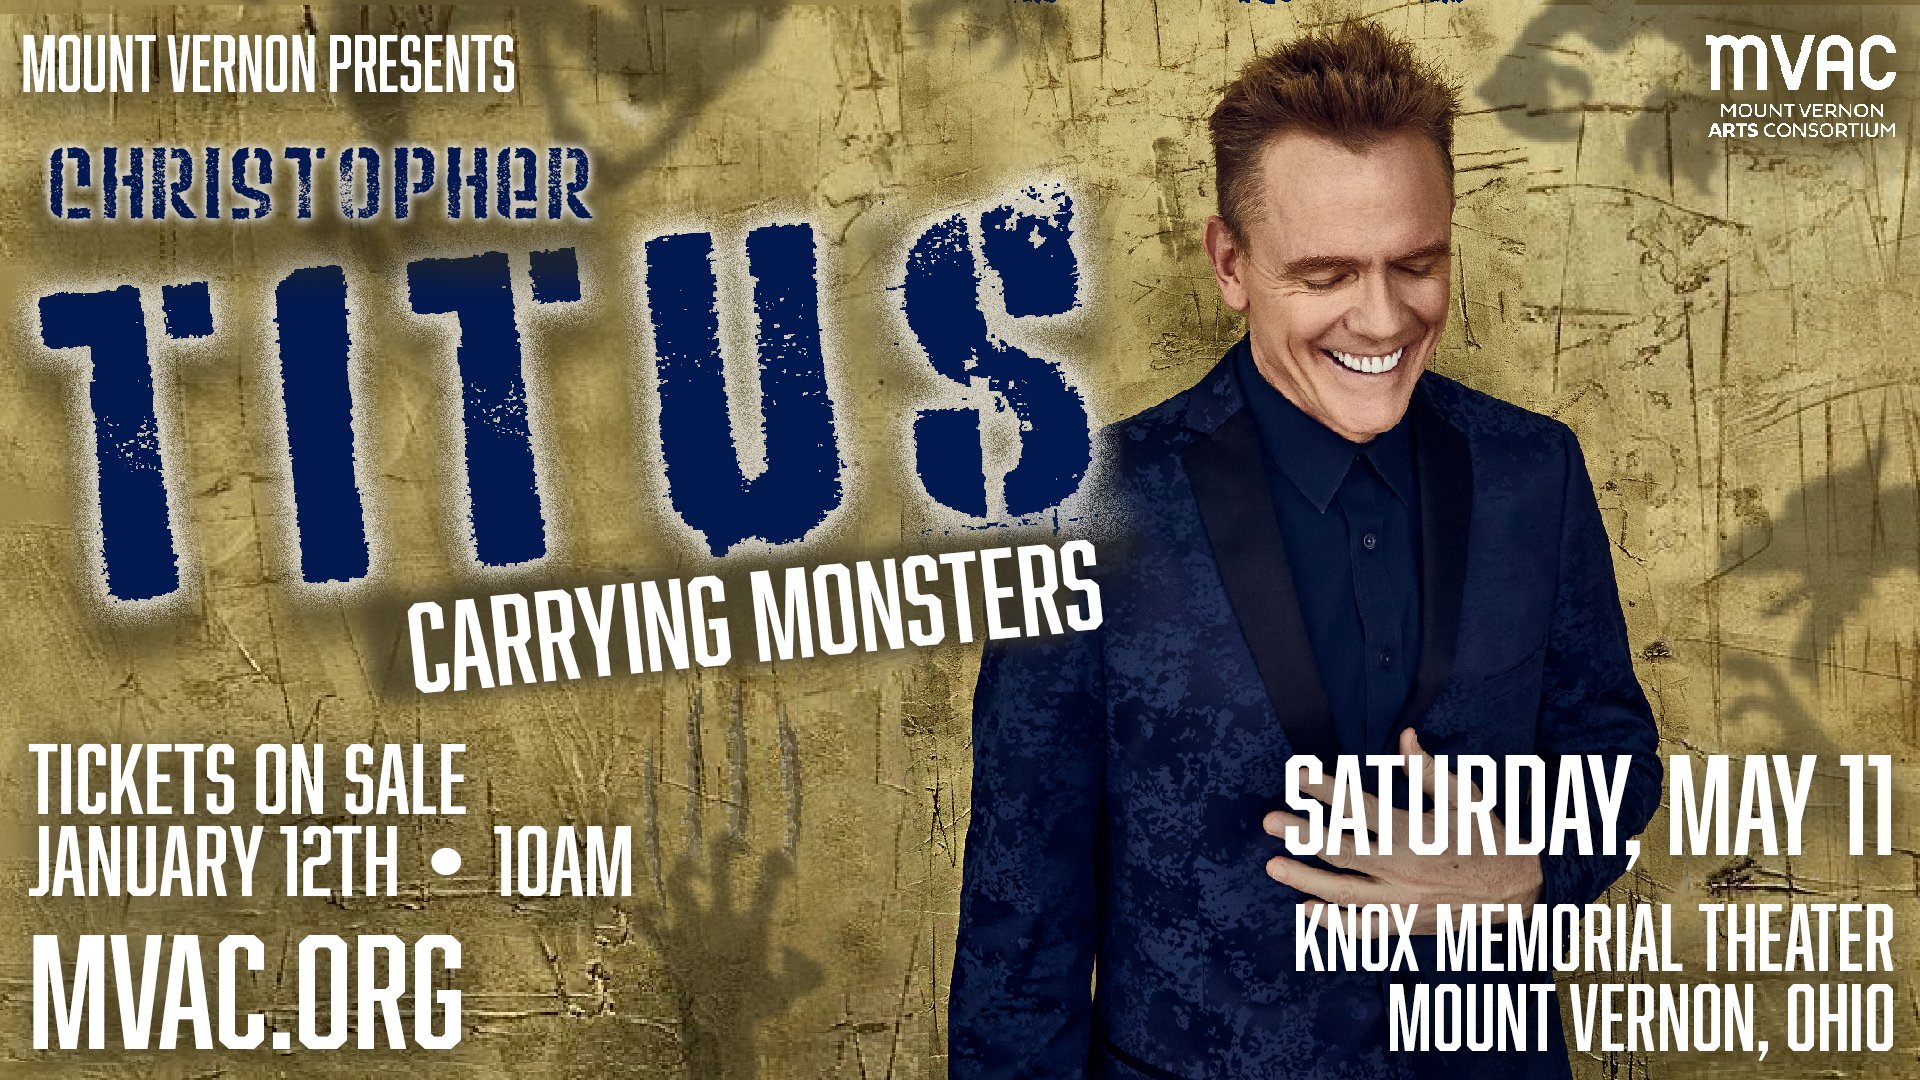 The Mount Vernon Arts Consortium is proud to announce our first show of the 2024 season, Christopher Titus! This hilarious stand-up comedian, writer, actor, and producer will join us at the Knox Memorial on May 11th. Tickets go on sale this Friday at